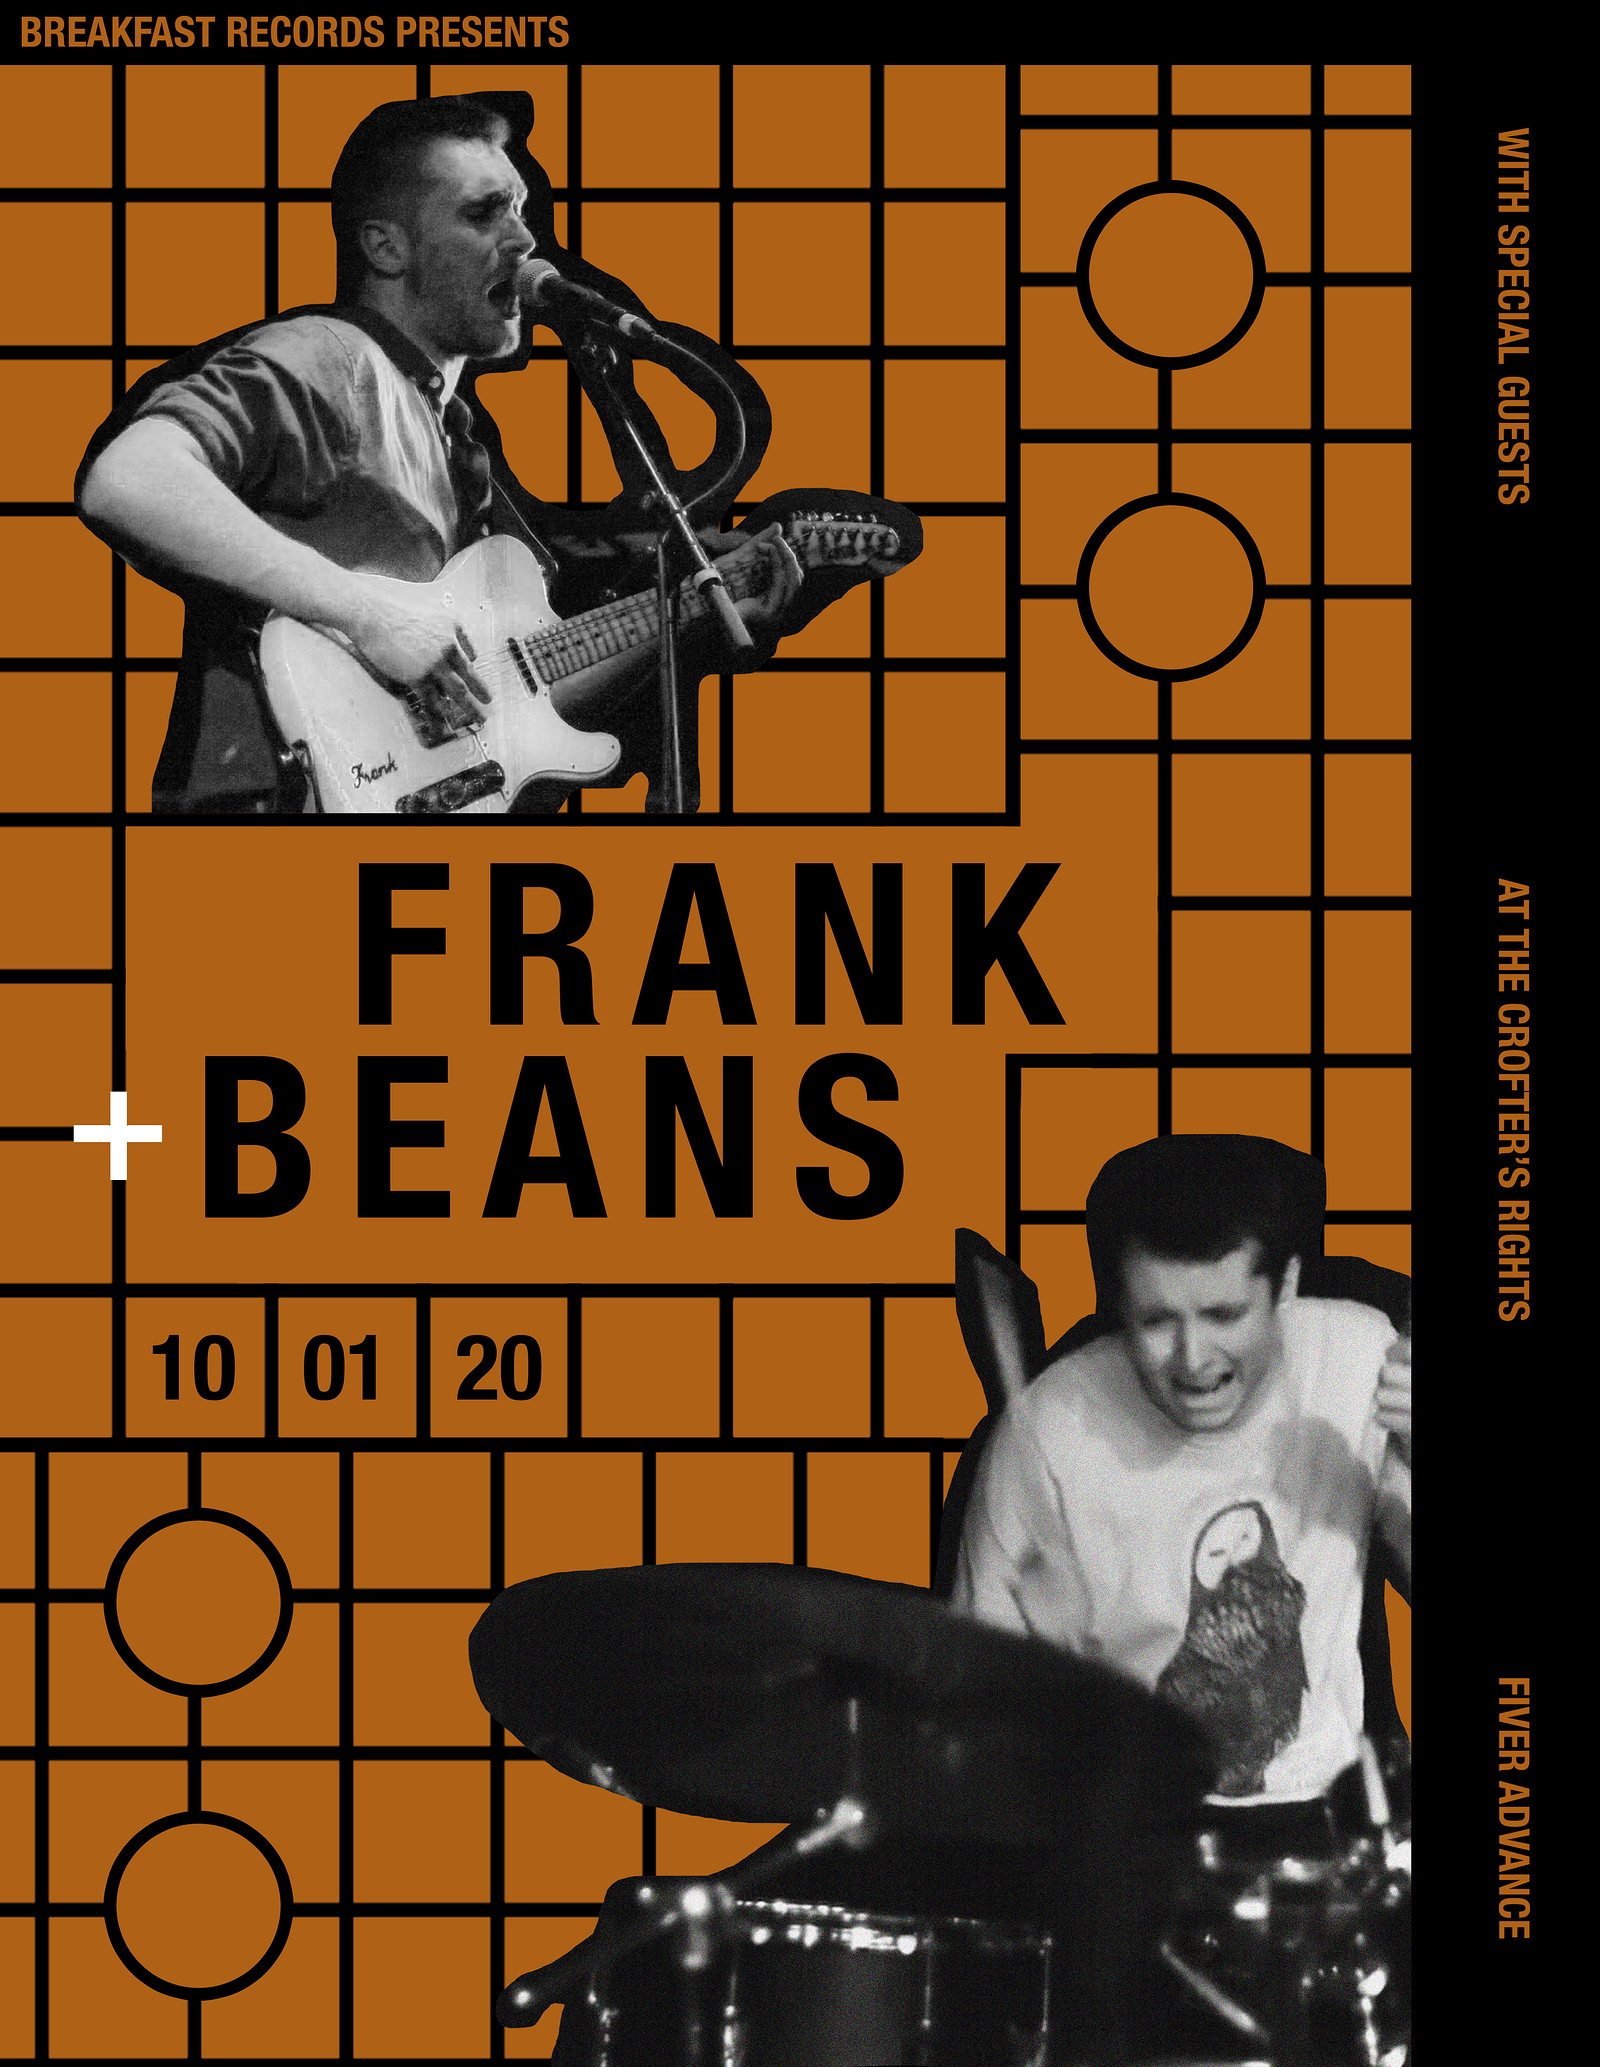 Frank & Beans at Crofters Rights